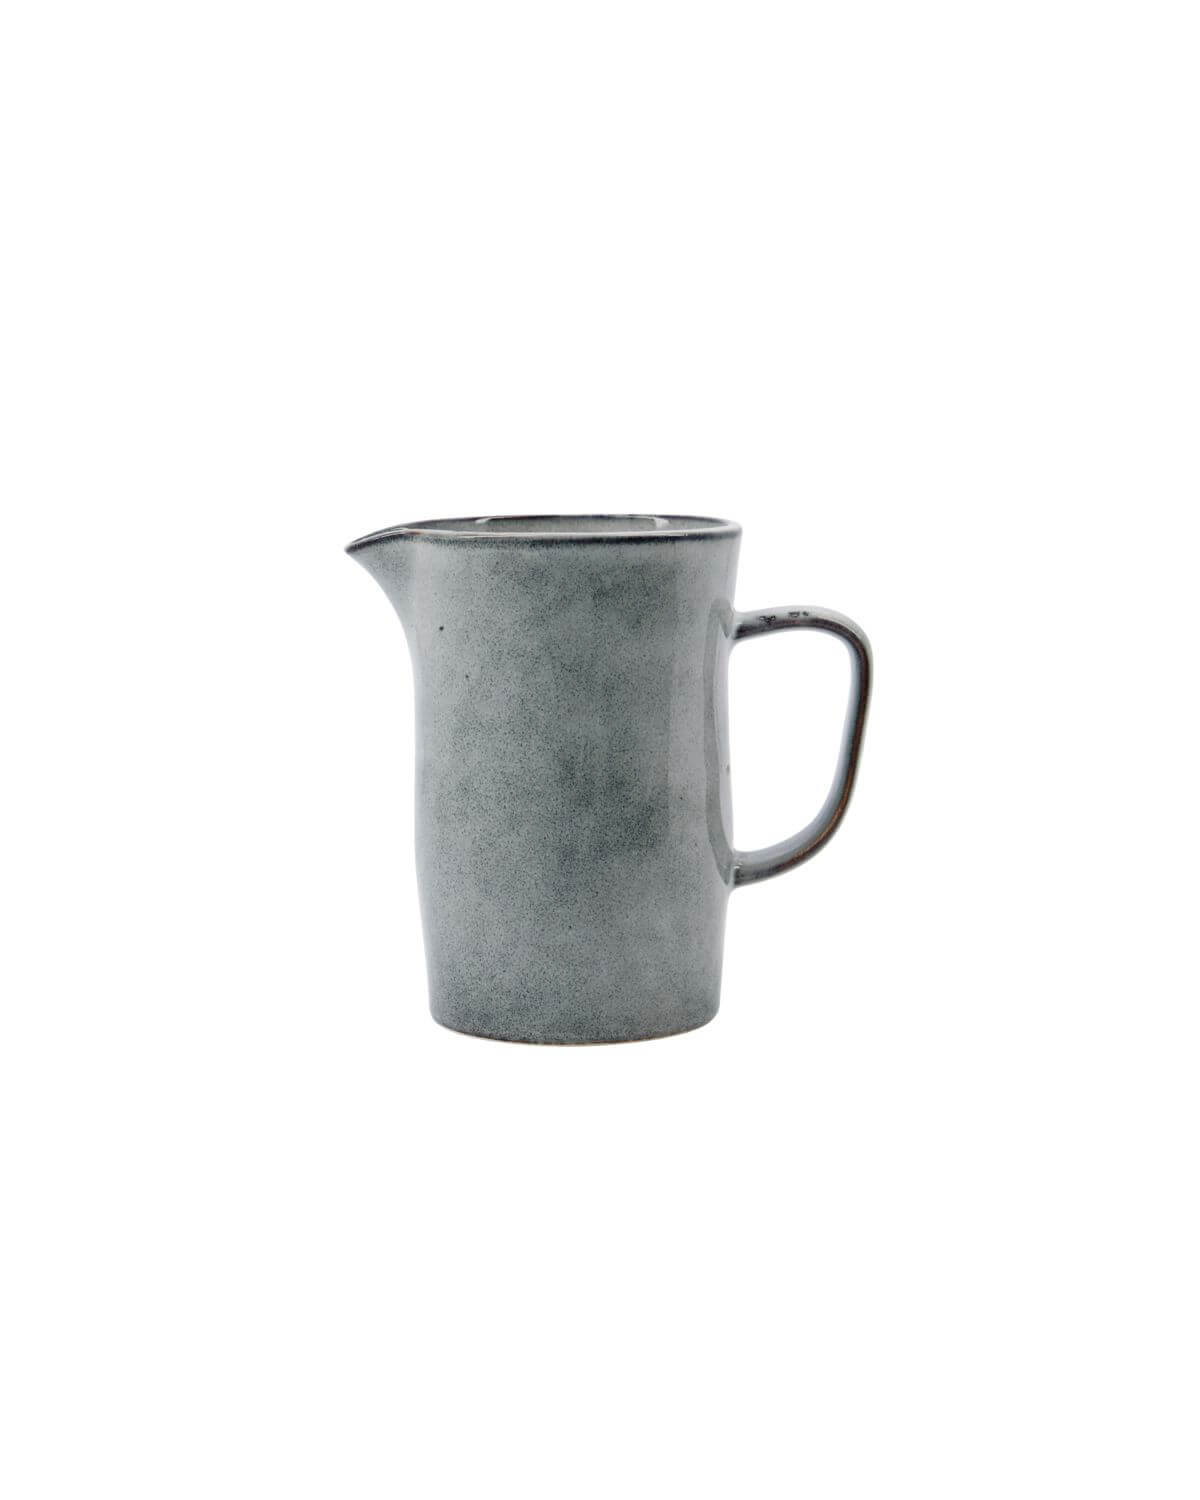 Jug (300ml) | Rustic | Grey / Blue | by House Doctor - Lifestory - House Doctor